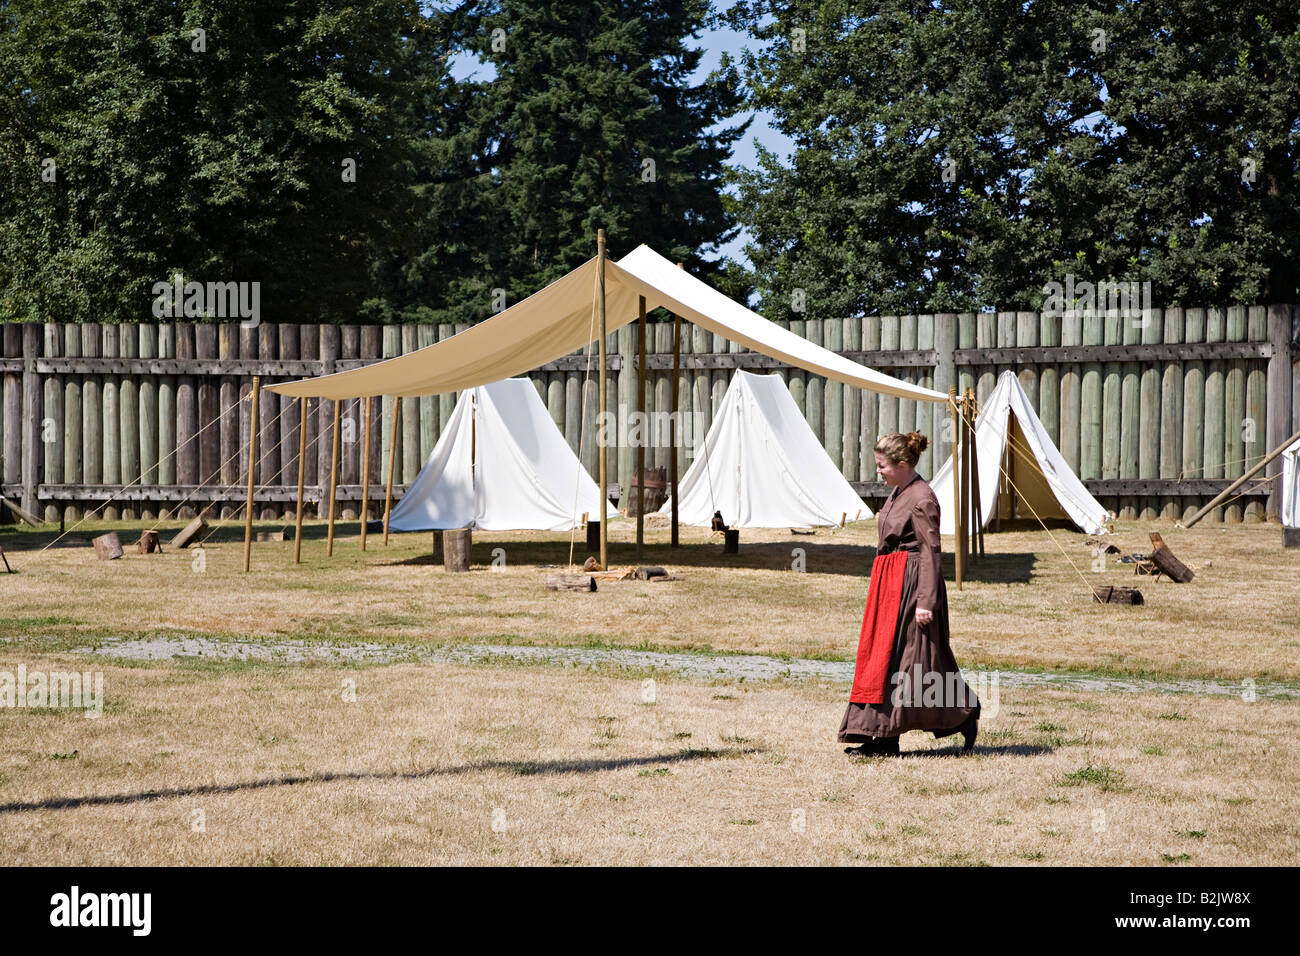 Woman in settler period costume walking past tents pitched at Fort Langley National Historic Site British Columbia Canada Stock Photo